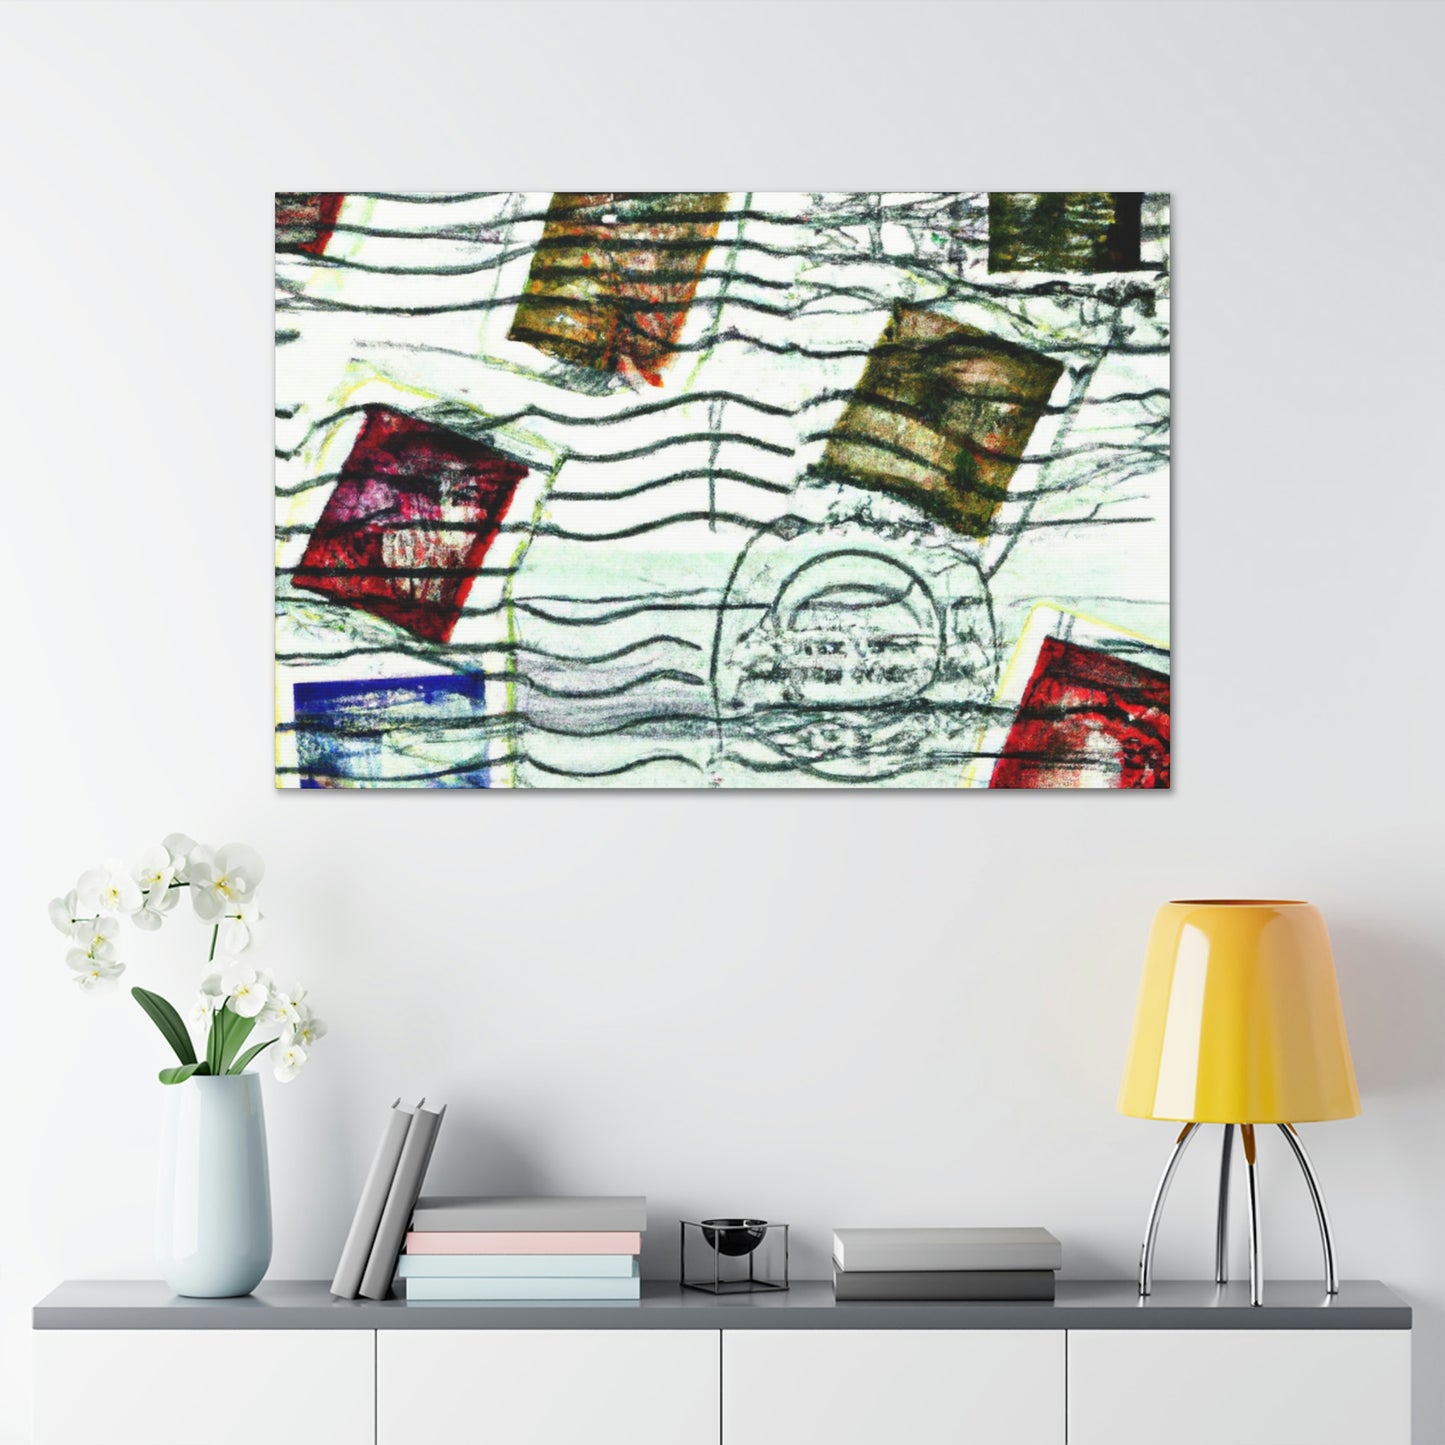 "Cultures of the World" - Postage Stamp Collector Canvas Wall Art